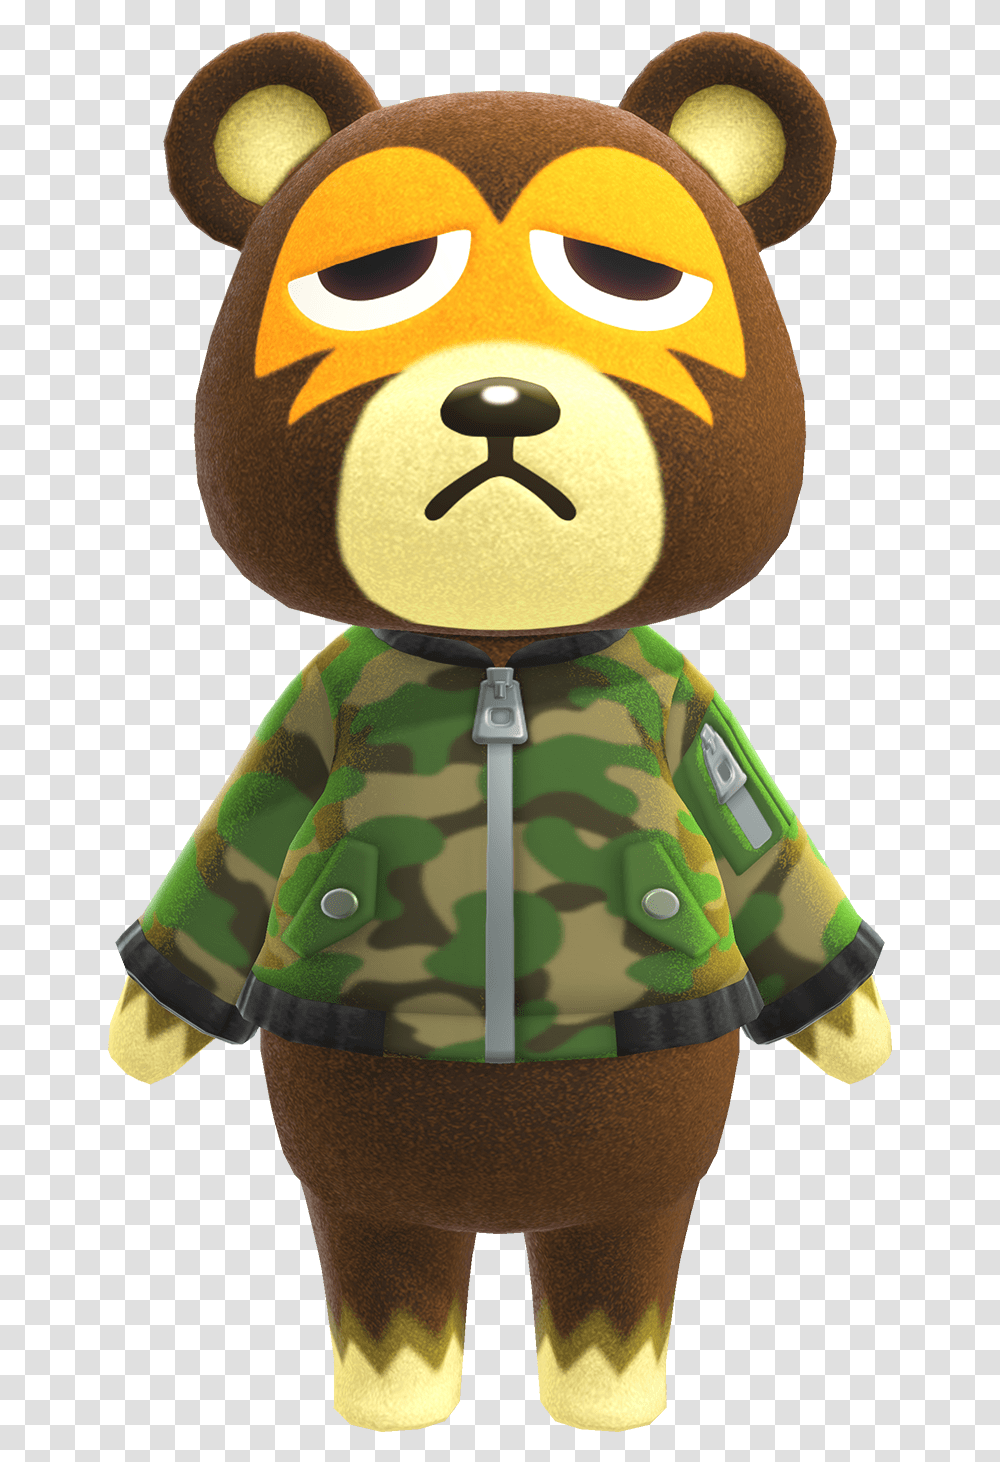 Ike Animal Crossing Wiki Nookipedia Ike Animal Crossing New Horizons, Military Uniform, Toy, Plush, Camouflage Transparent Png